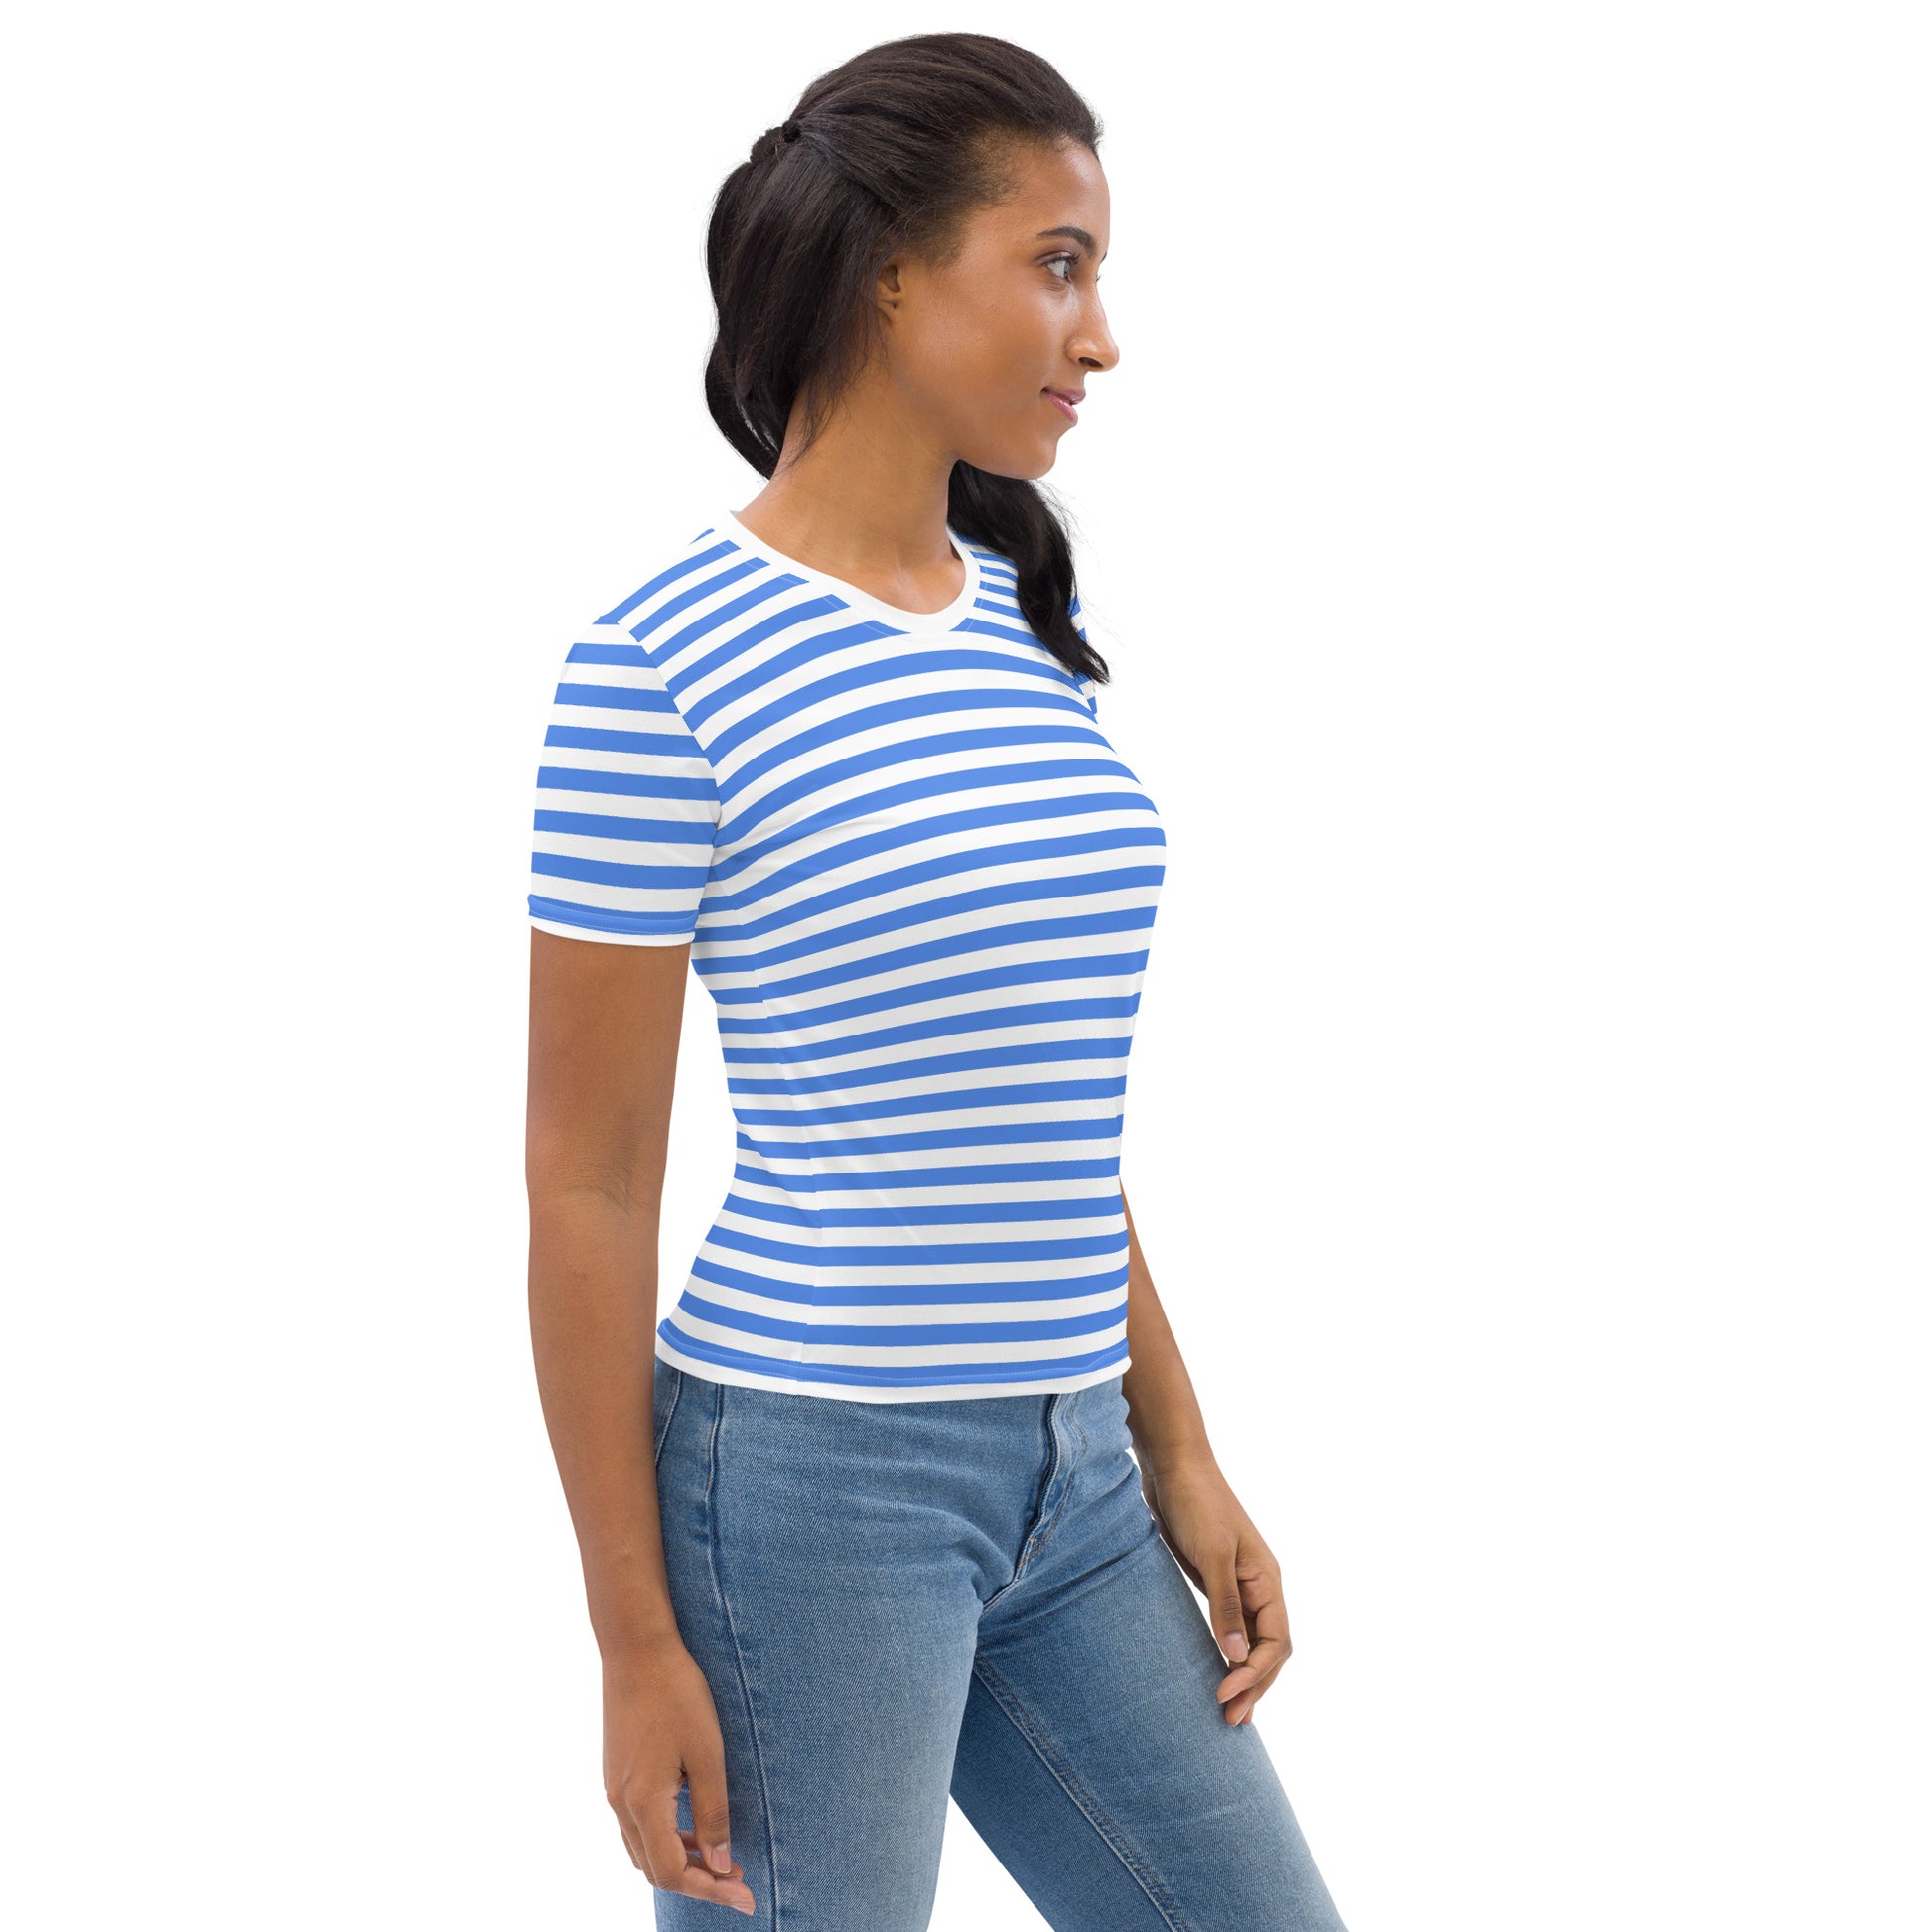 White And Blue Striped Shirt For Women